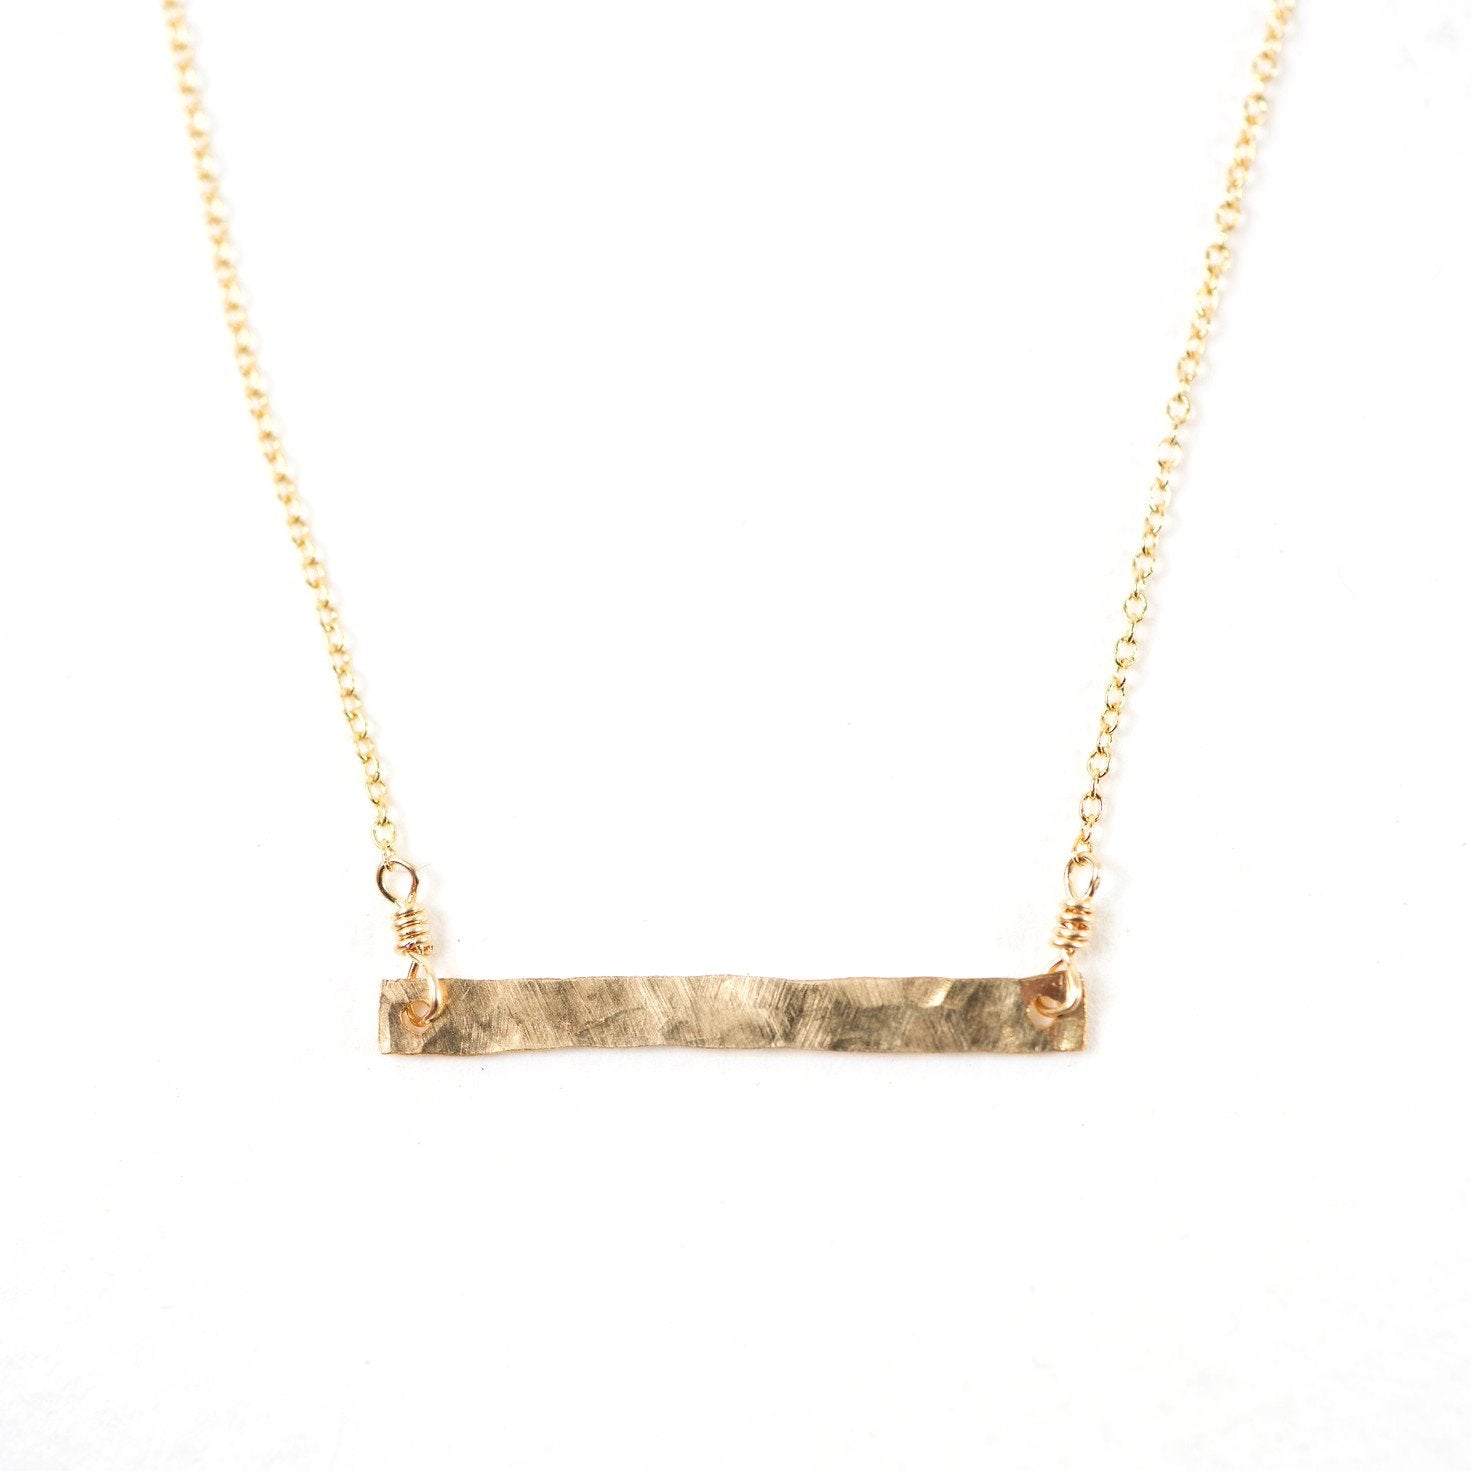 Hammered Bar Necklace - Shelter Jewelry Shop DC